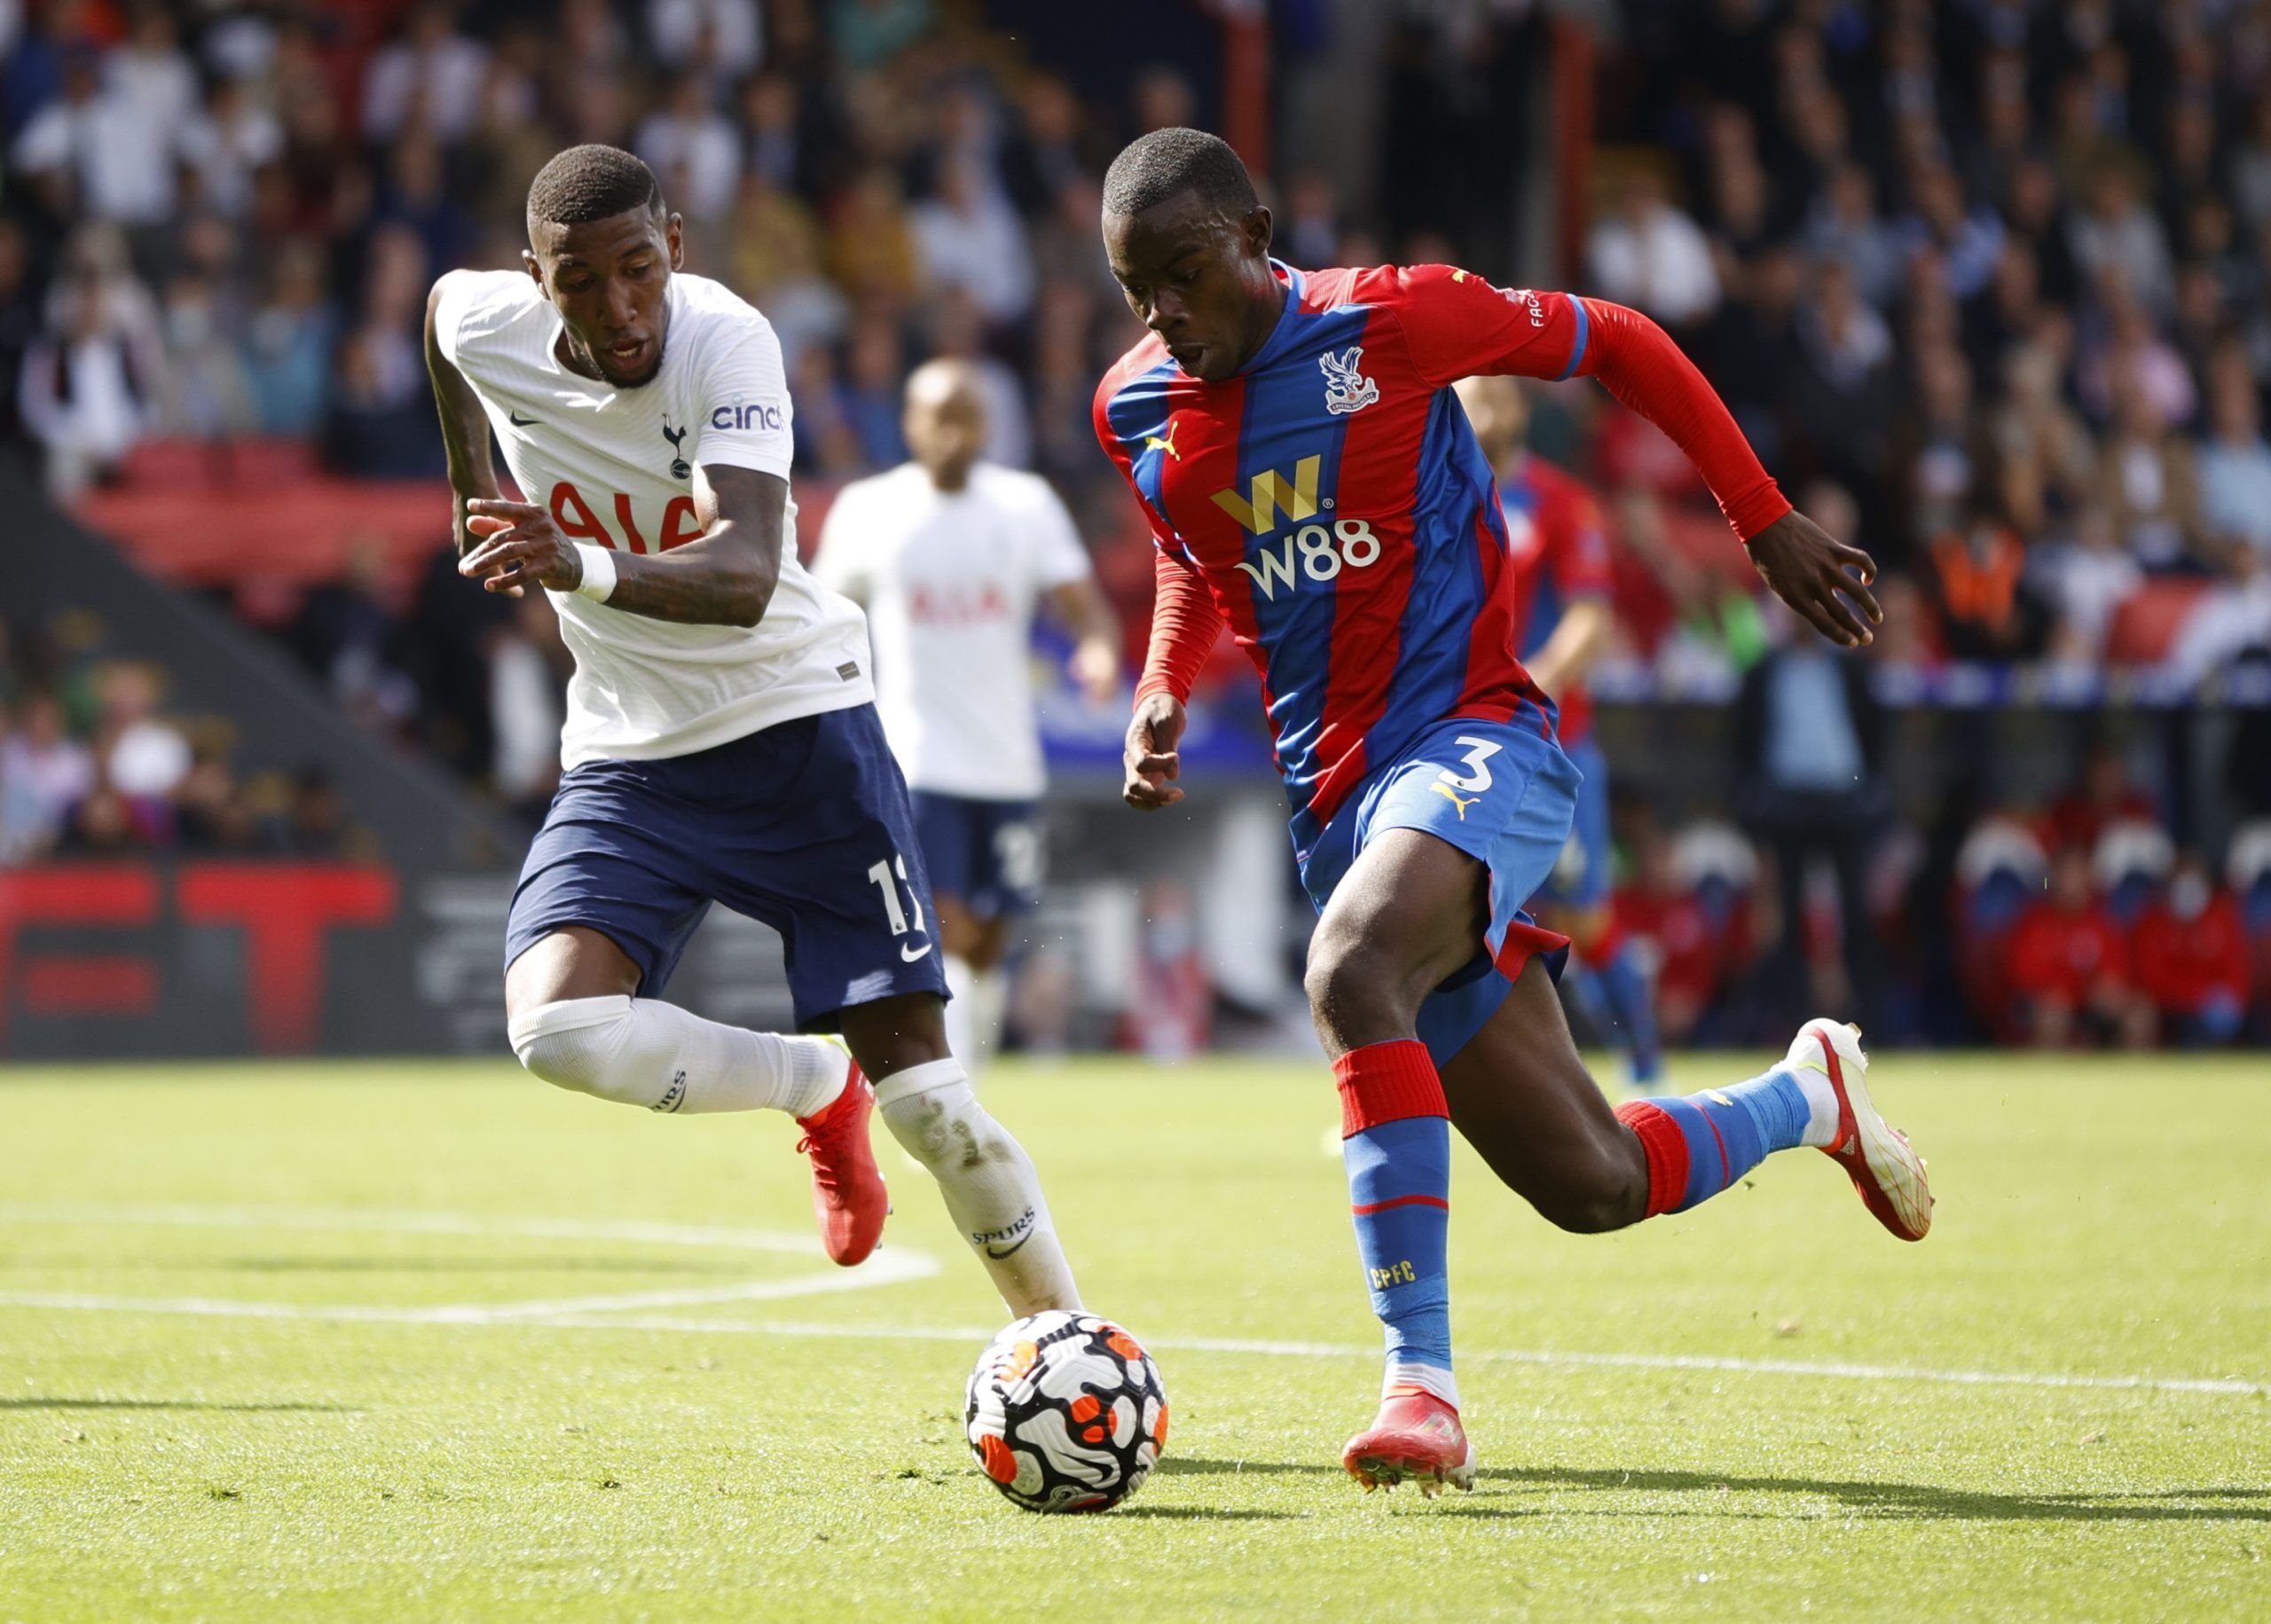 Soccer Football - Premier League - Crystal Palace v Tottenham Hotspur - Selhurst Park, London, Britain - September 11, 2021 Crystal Palace's Tyrick Mitchell in action with Tottenham Hotspur's Emerson Royal Action Images via Reuters/John Sibley EDITORIAL USE ONLY. No use with unauthorized audio, video, data, fixture lists, club/league logos or 'live' services. Online in-match use limited to 75 images, no video emulation. No use in betting, games or single club /league/player publications.  Please